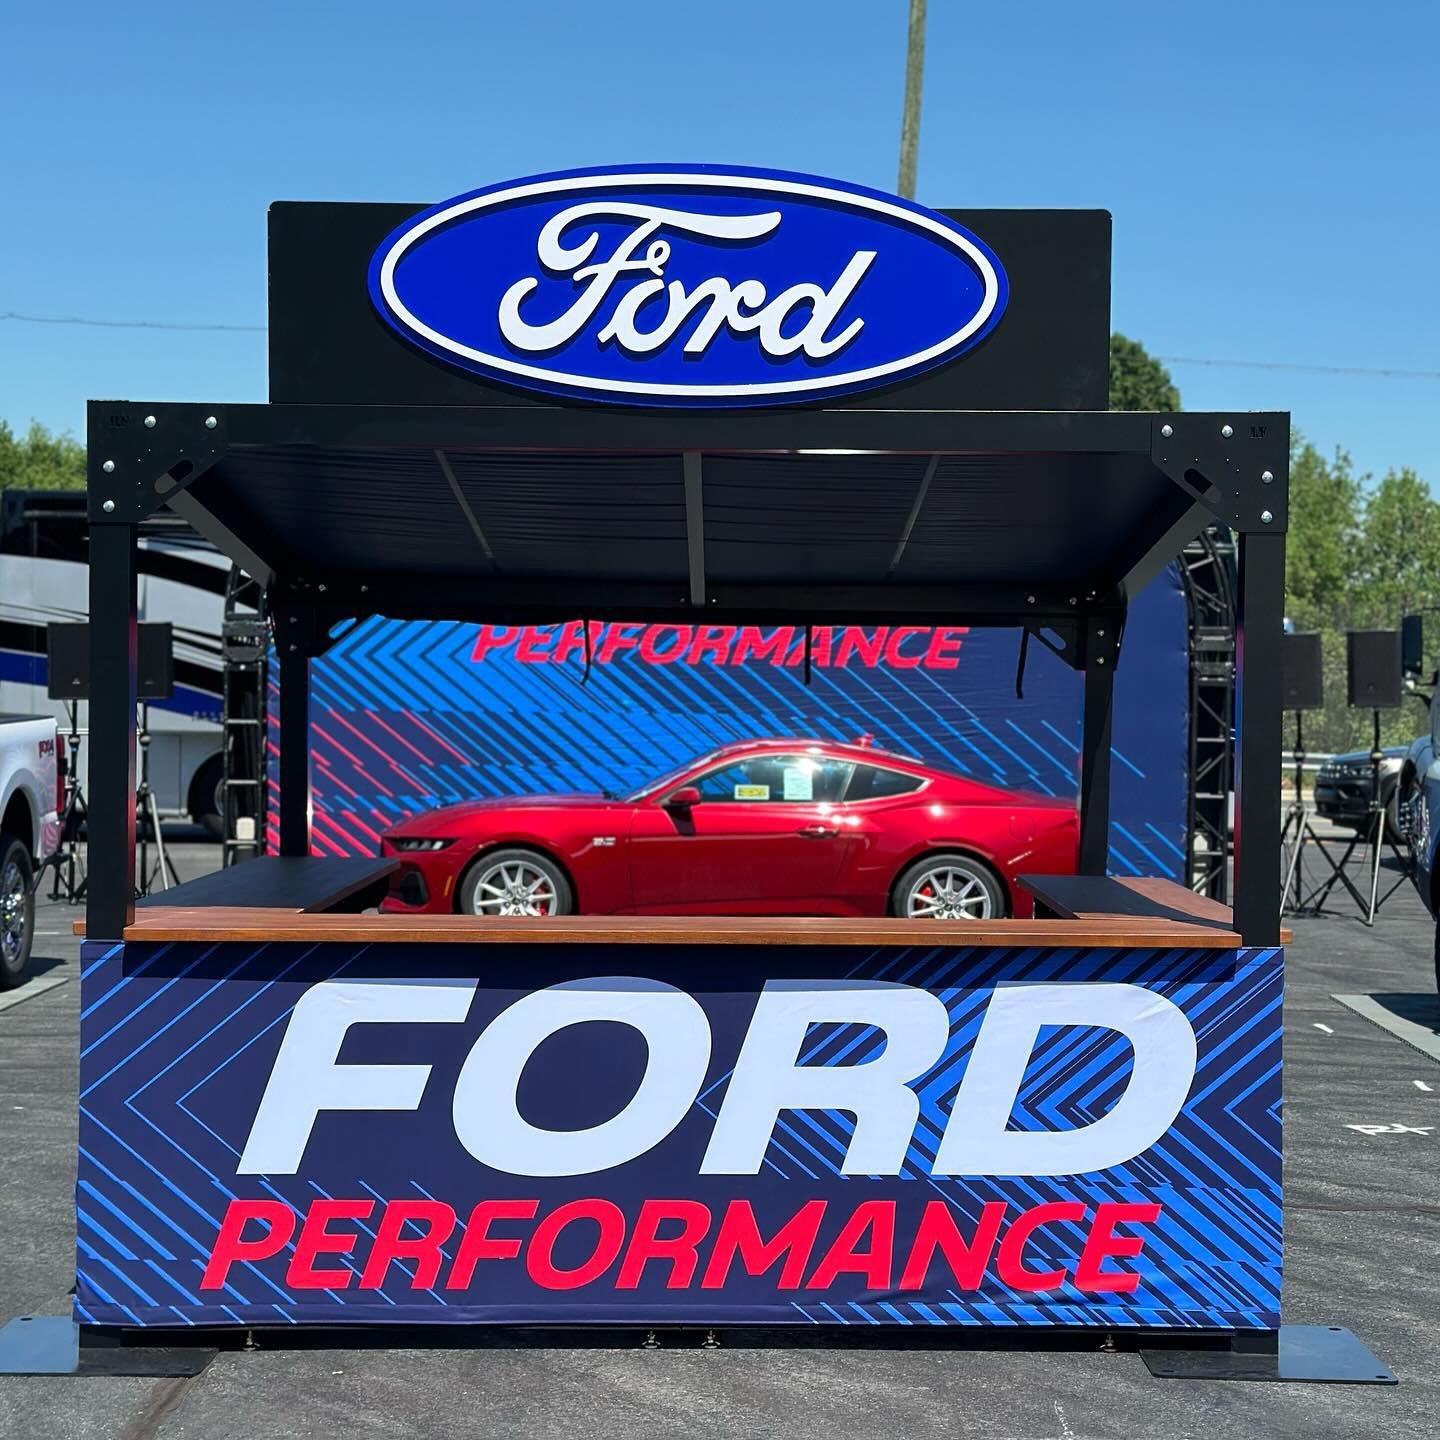 Our North American Experiential Operations team has had a busy few weeks with @fordperformance!

We&rsquo;ve built out activations in Washington, D.C., Delaware at @monstermile, and right in our Charlotte team&rsquo;s backyard at the @nhra 4-Wide Nat